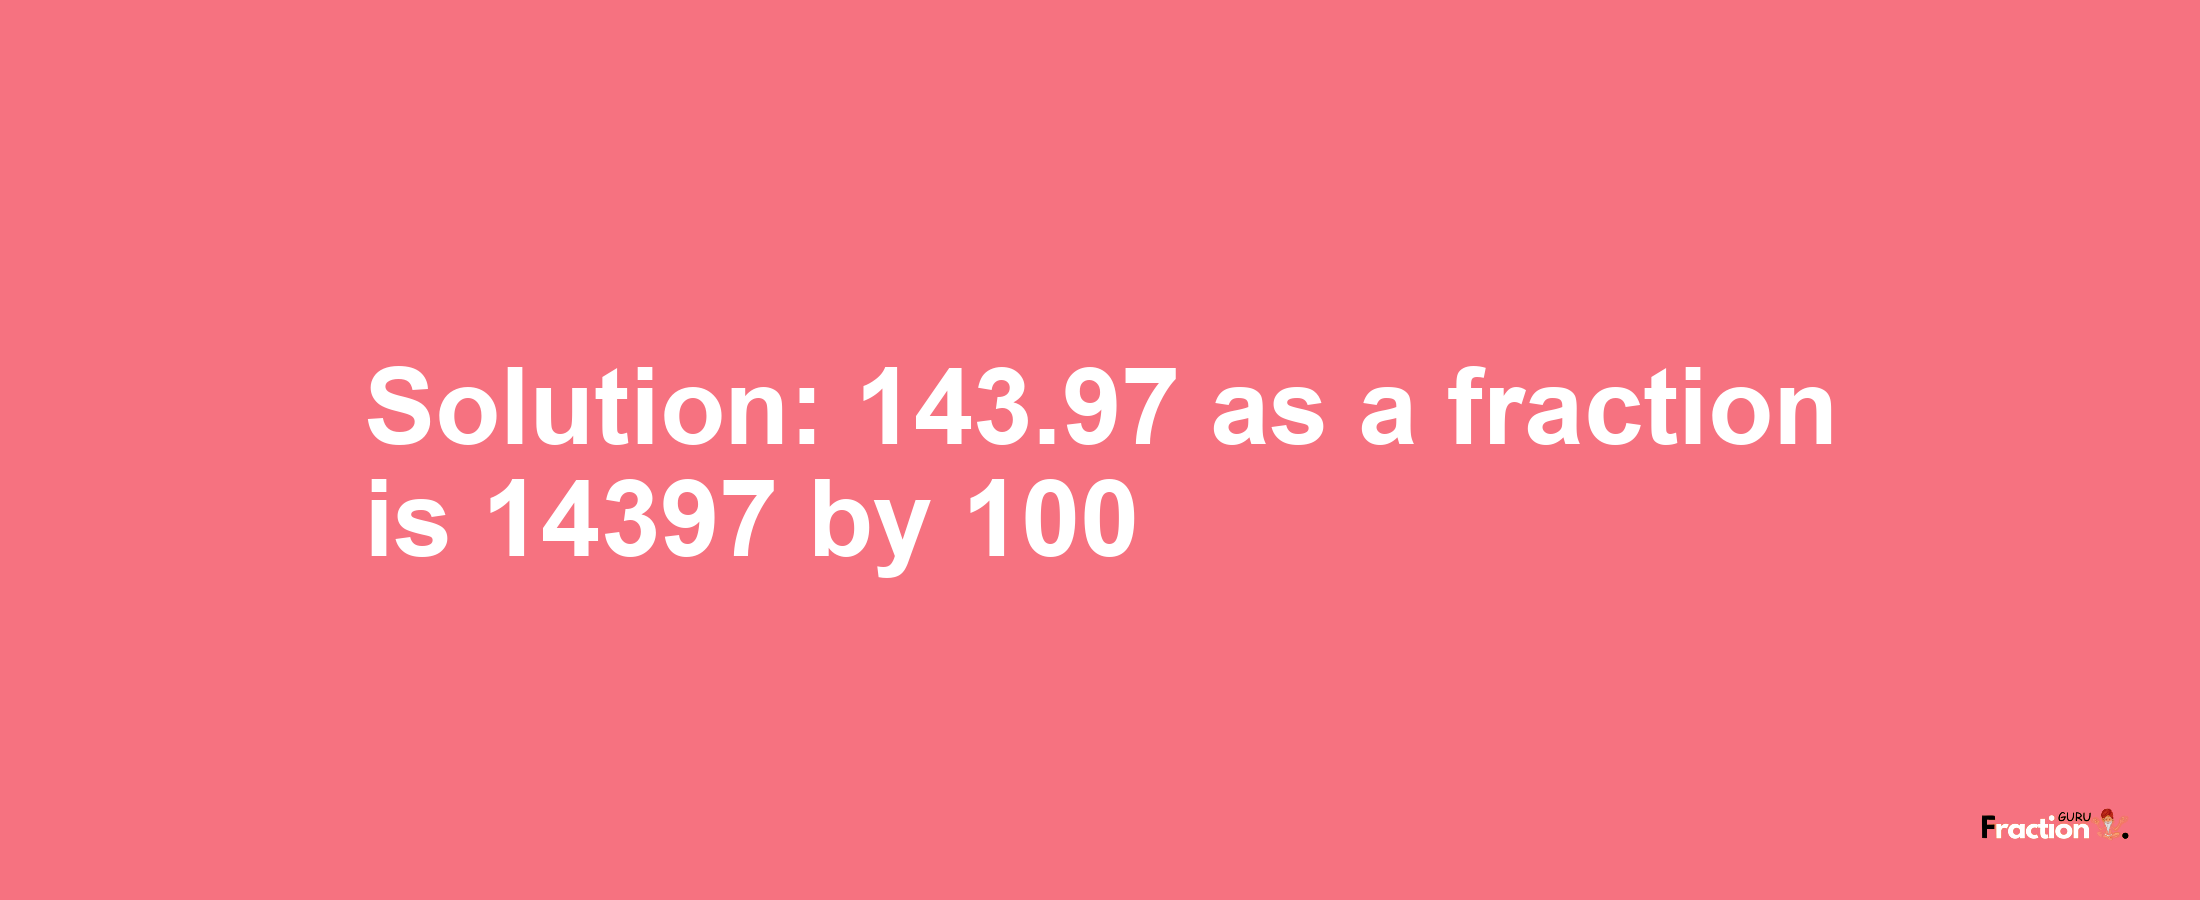 Solution:143.97 as a fraction is 14397/100